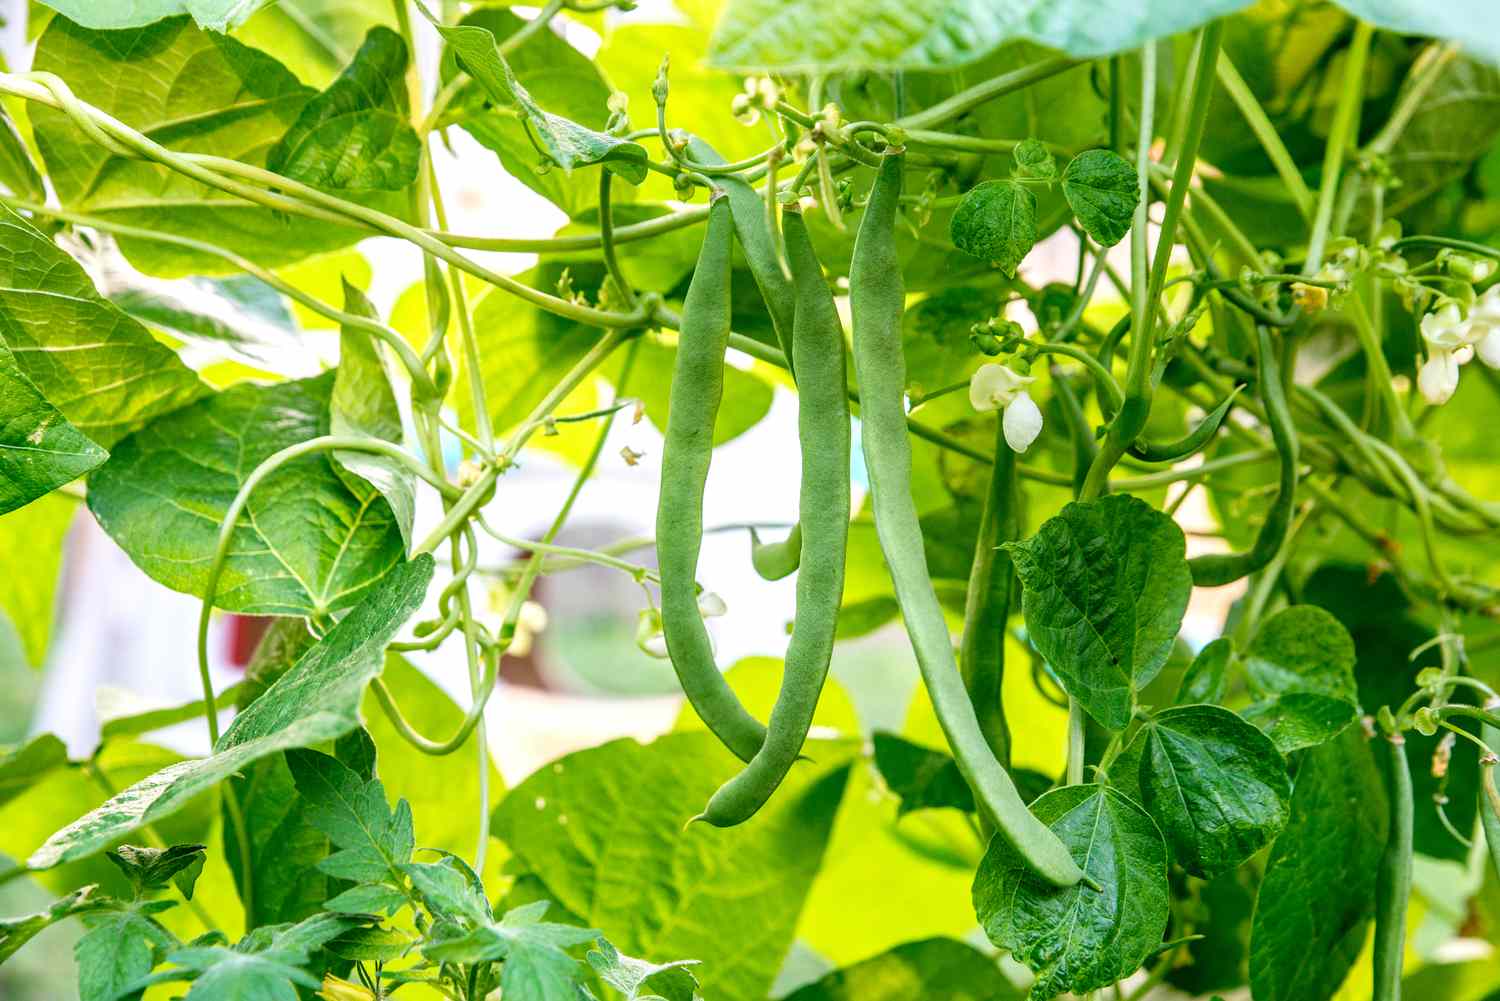 18 Facts About Bean Plants - Facts.net